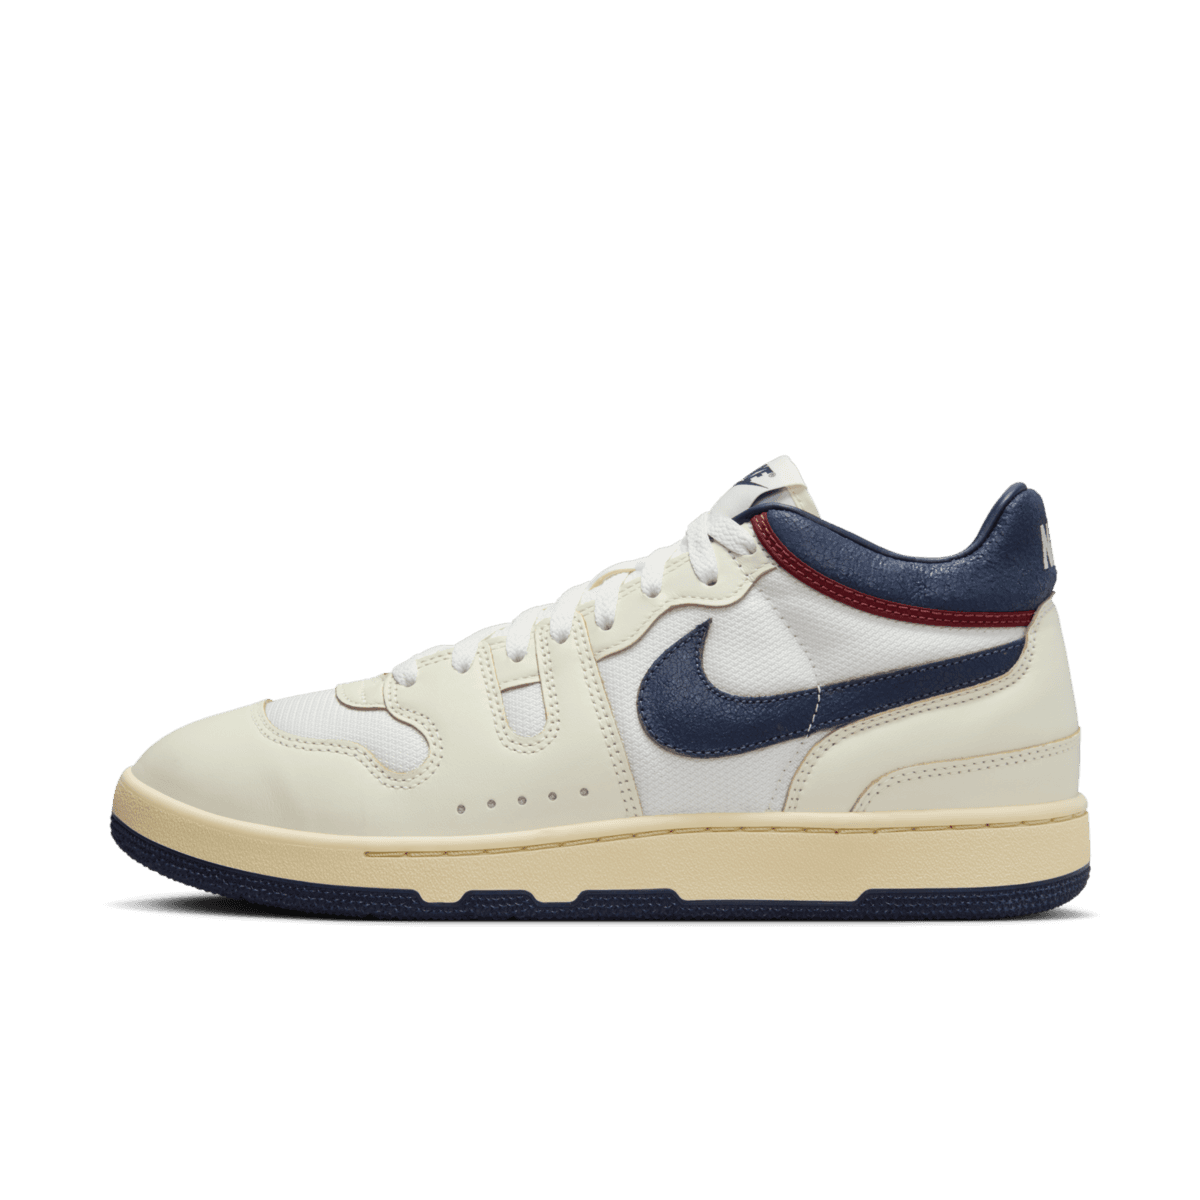 Nike Mac Attack PRM 'Better With Age'